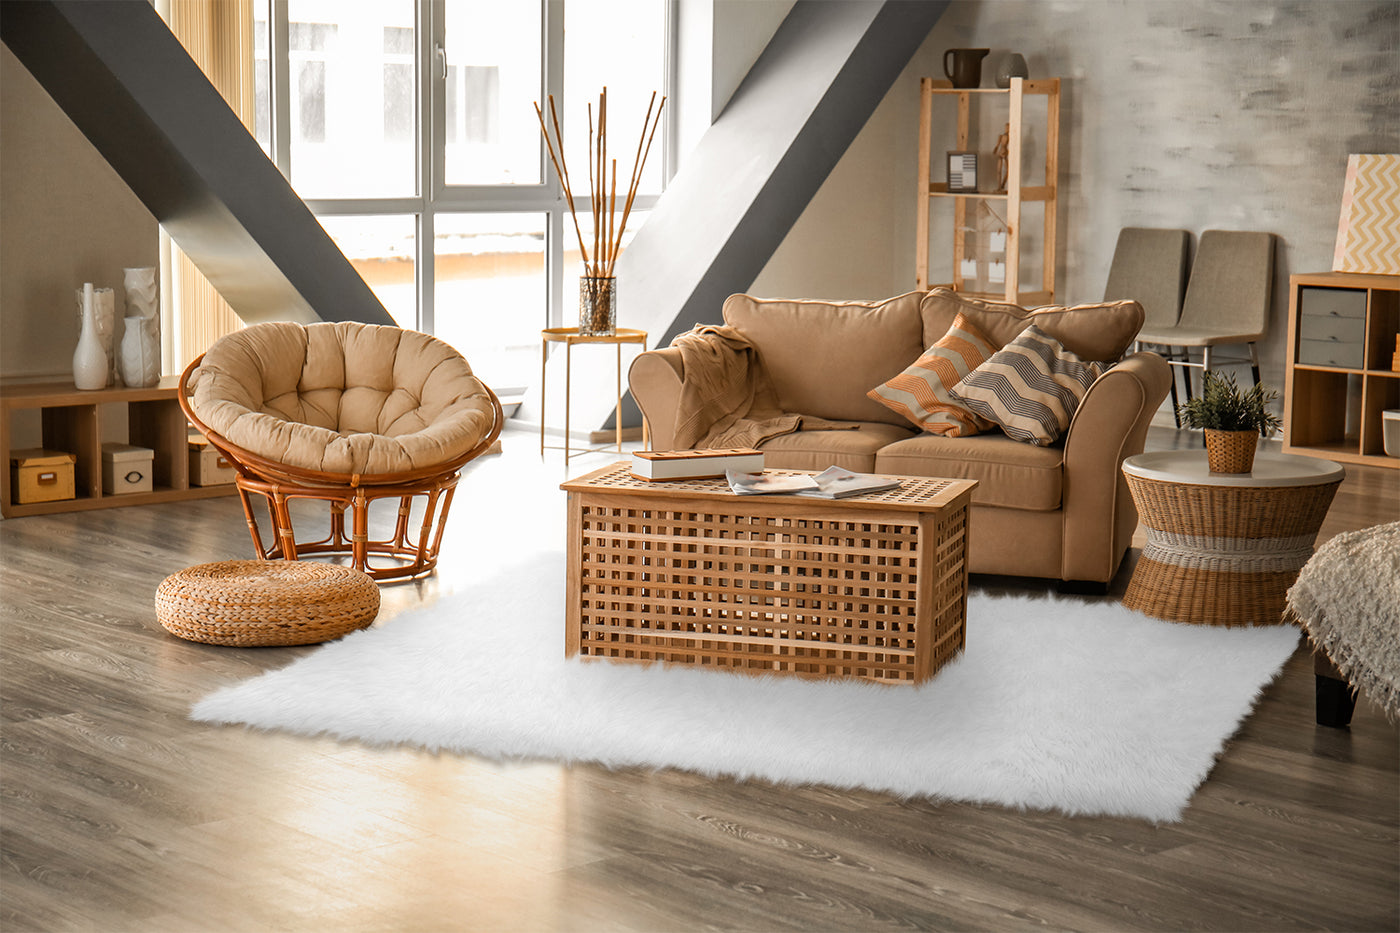 cream colored shag rug with wicker trunk coffee table, wicker side table, hard wood floors, a tan colored couch with throw pillows three wood book cases placed around the room and a papasan chair. 